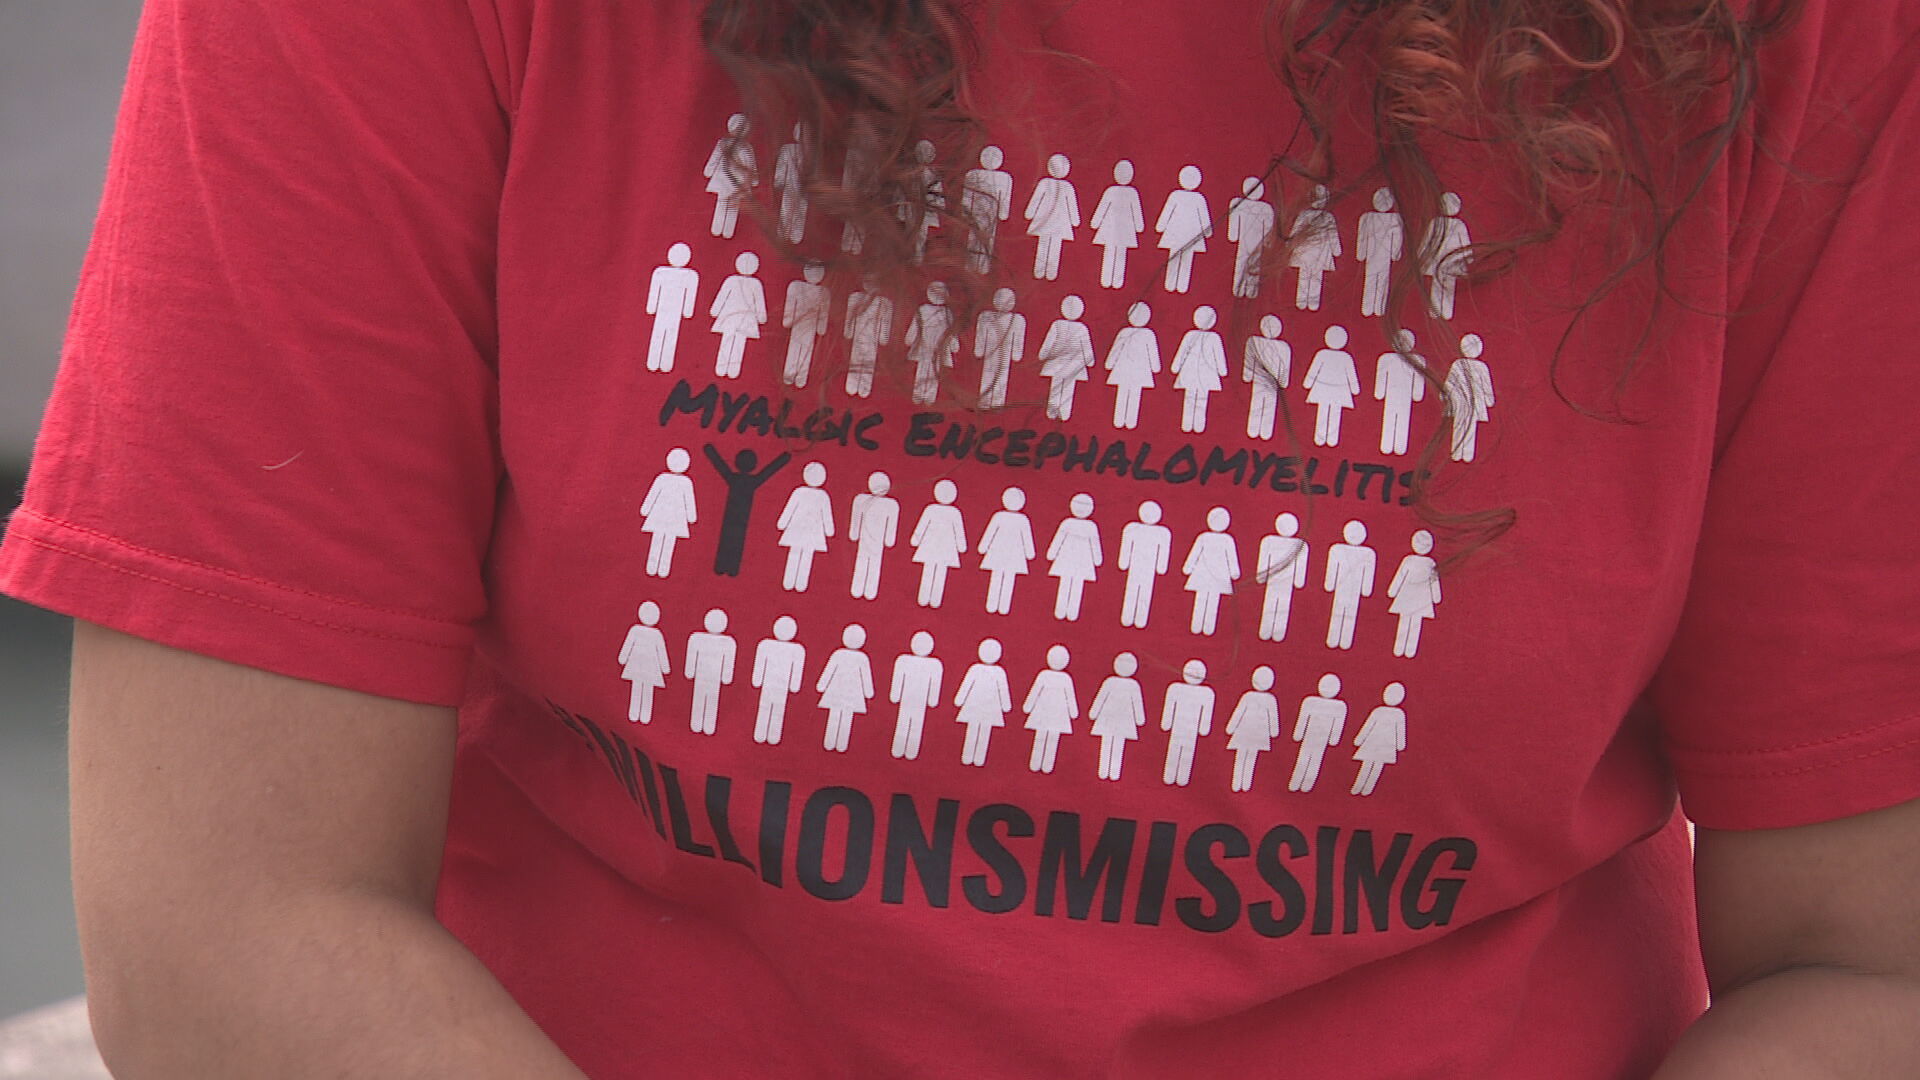 Karima works with the 'Millions Missing' health equality campaign for ME